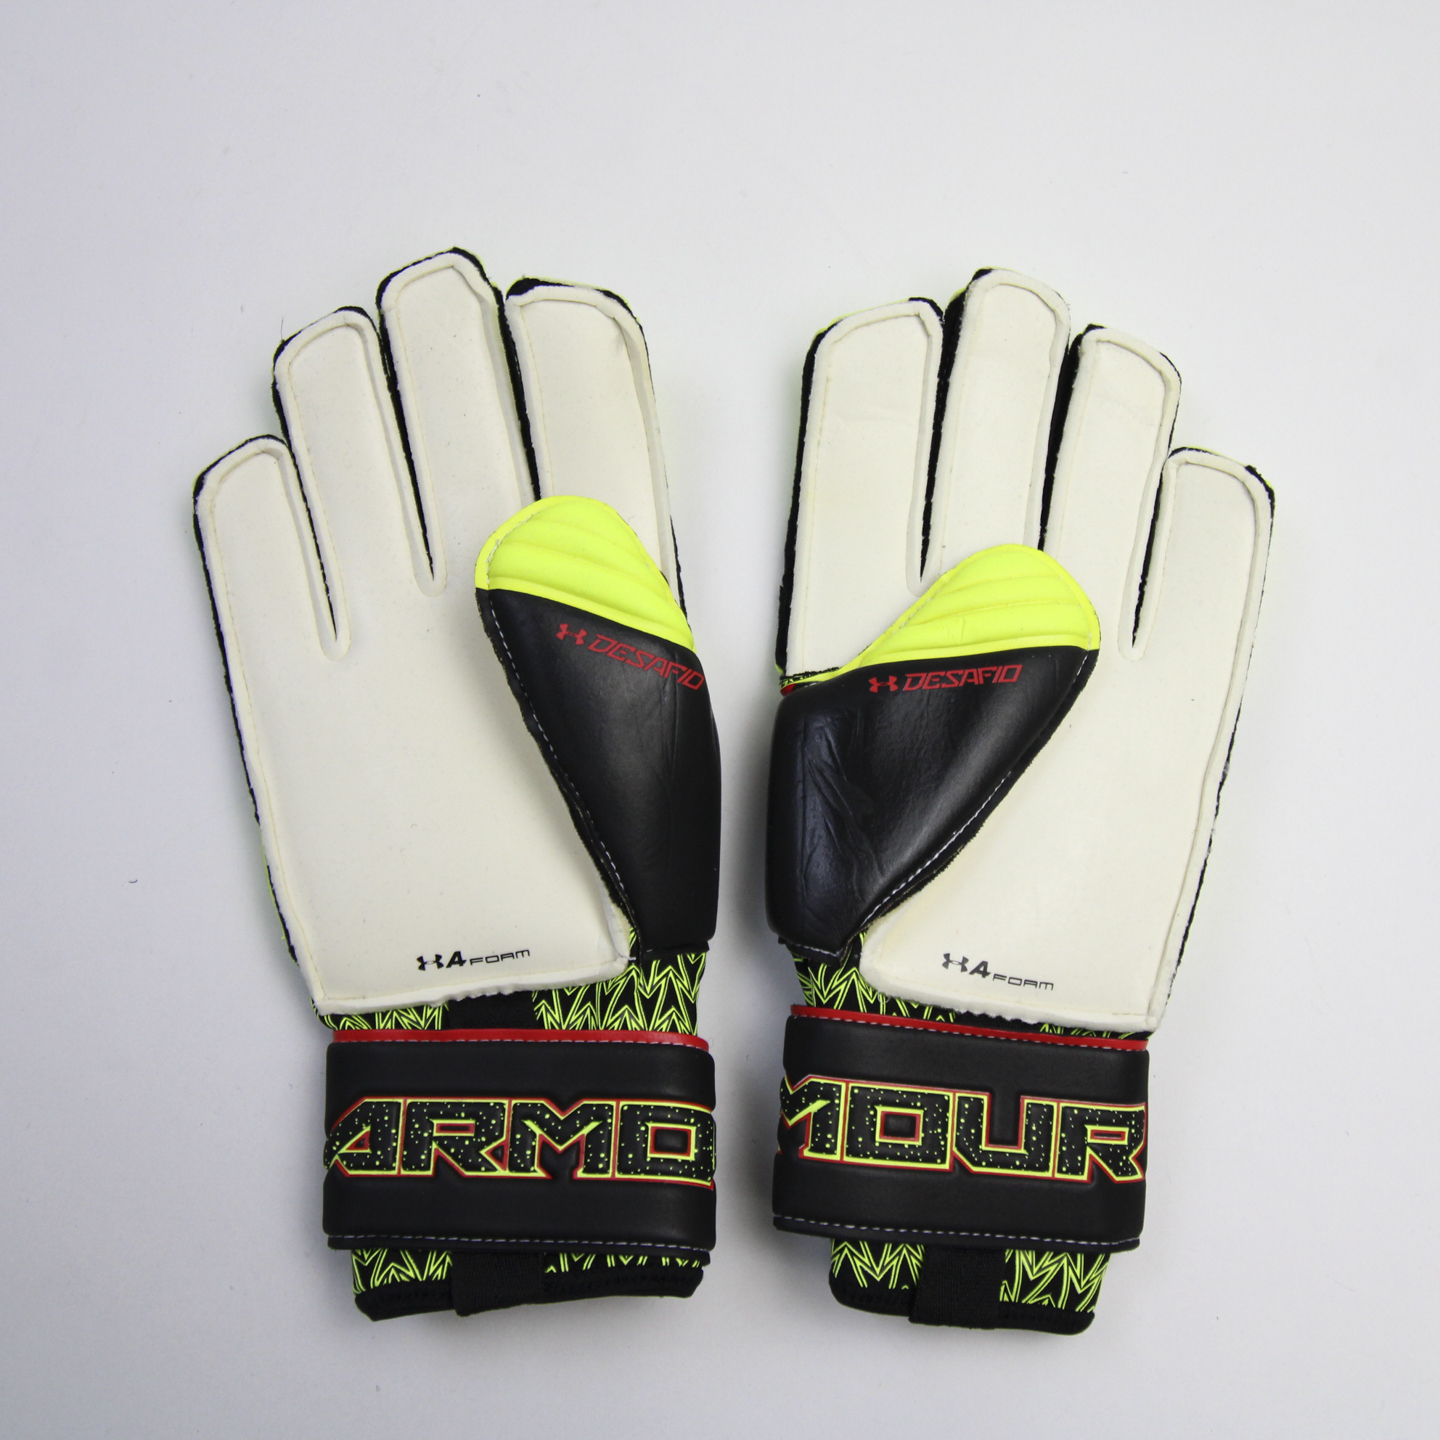 Under Armour Goal Keeper Gloves NEW in Packaging Hi-Vis Yellow/Black 